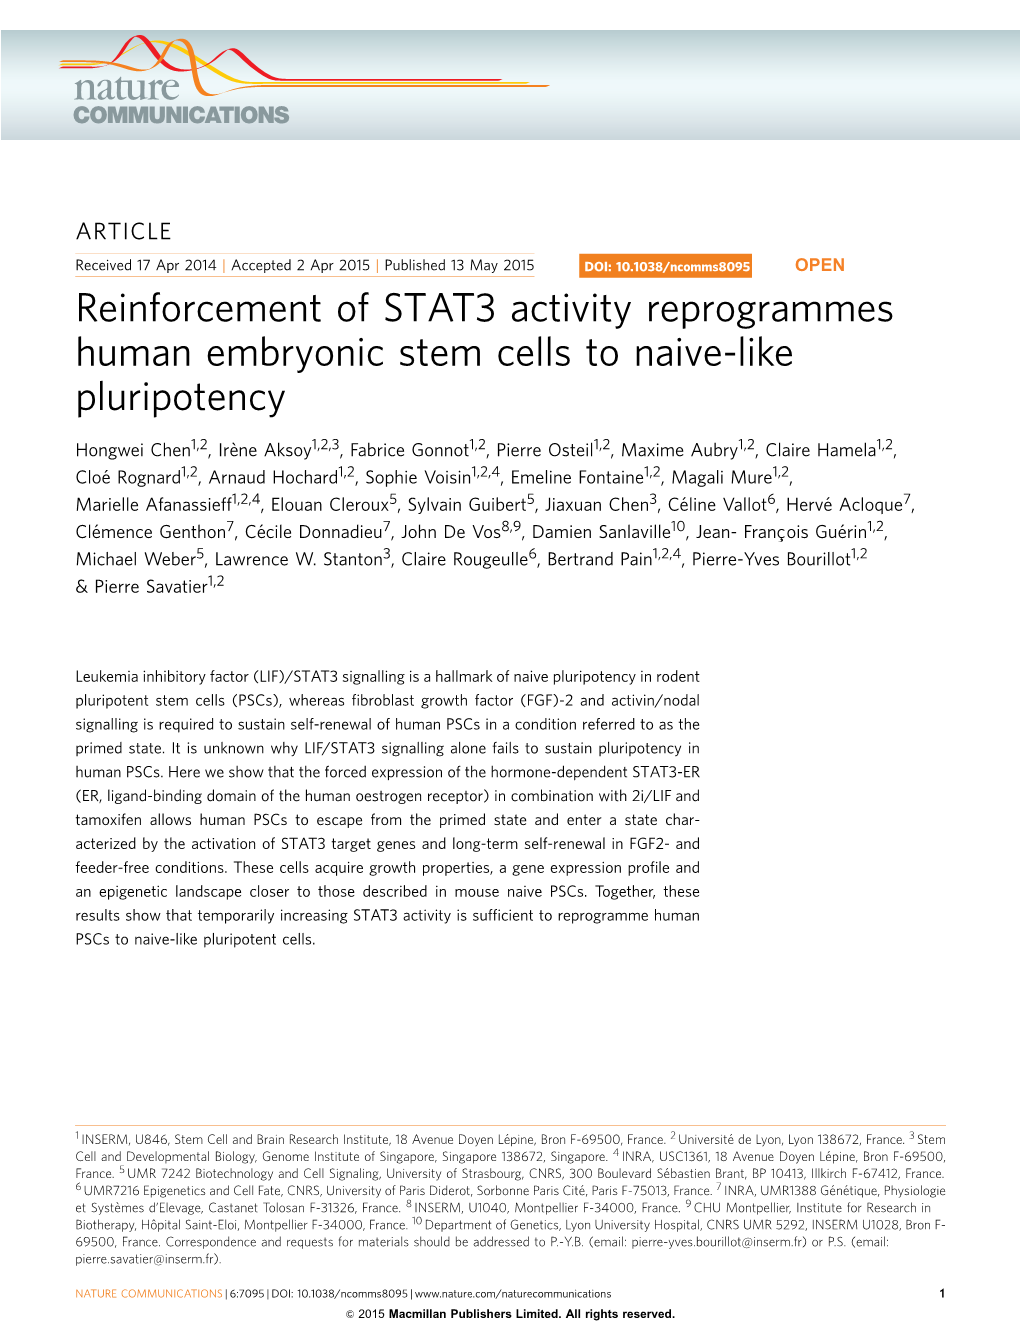 Reinforcement of STAT3 Activity Reprogrammes Human Embryonic Stem Cells to Naive-Like Pluripotency